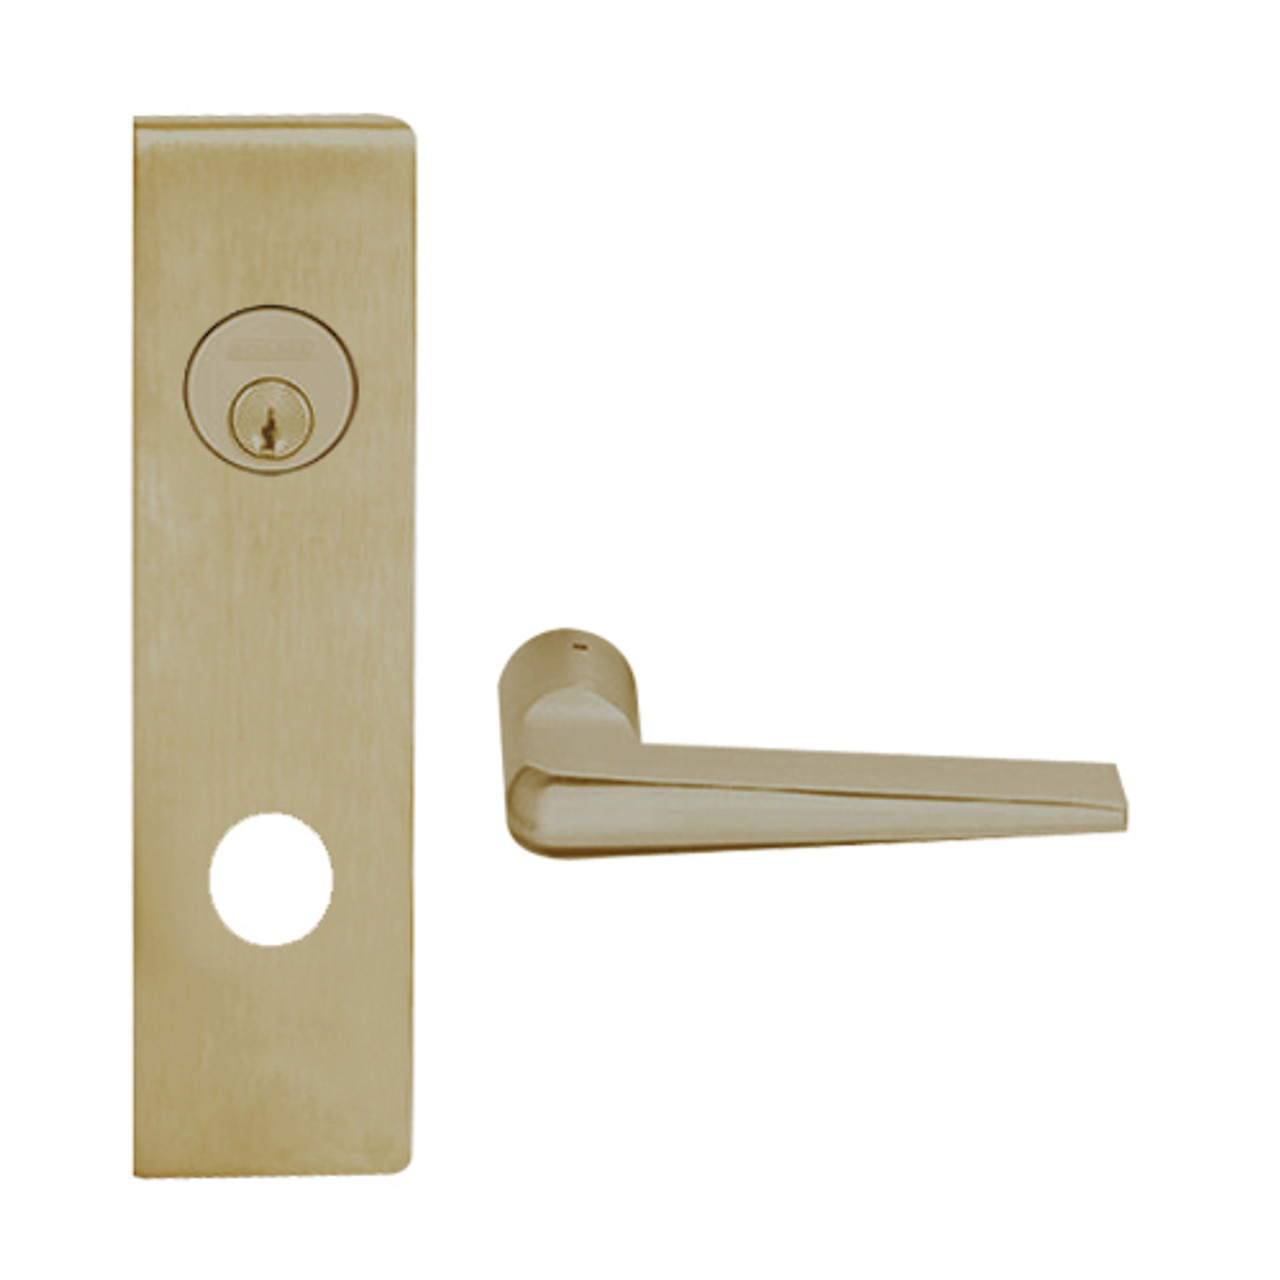 L9456L-05N-613 Schlage L Series Less Cylinder Corridor with Deadbolt Commercial Mortise Lock with 05 Cast Lever Design in Oil Rubbed Bronze